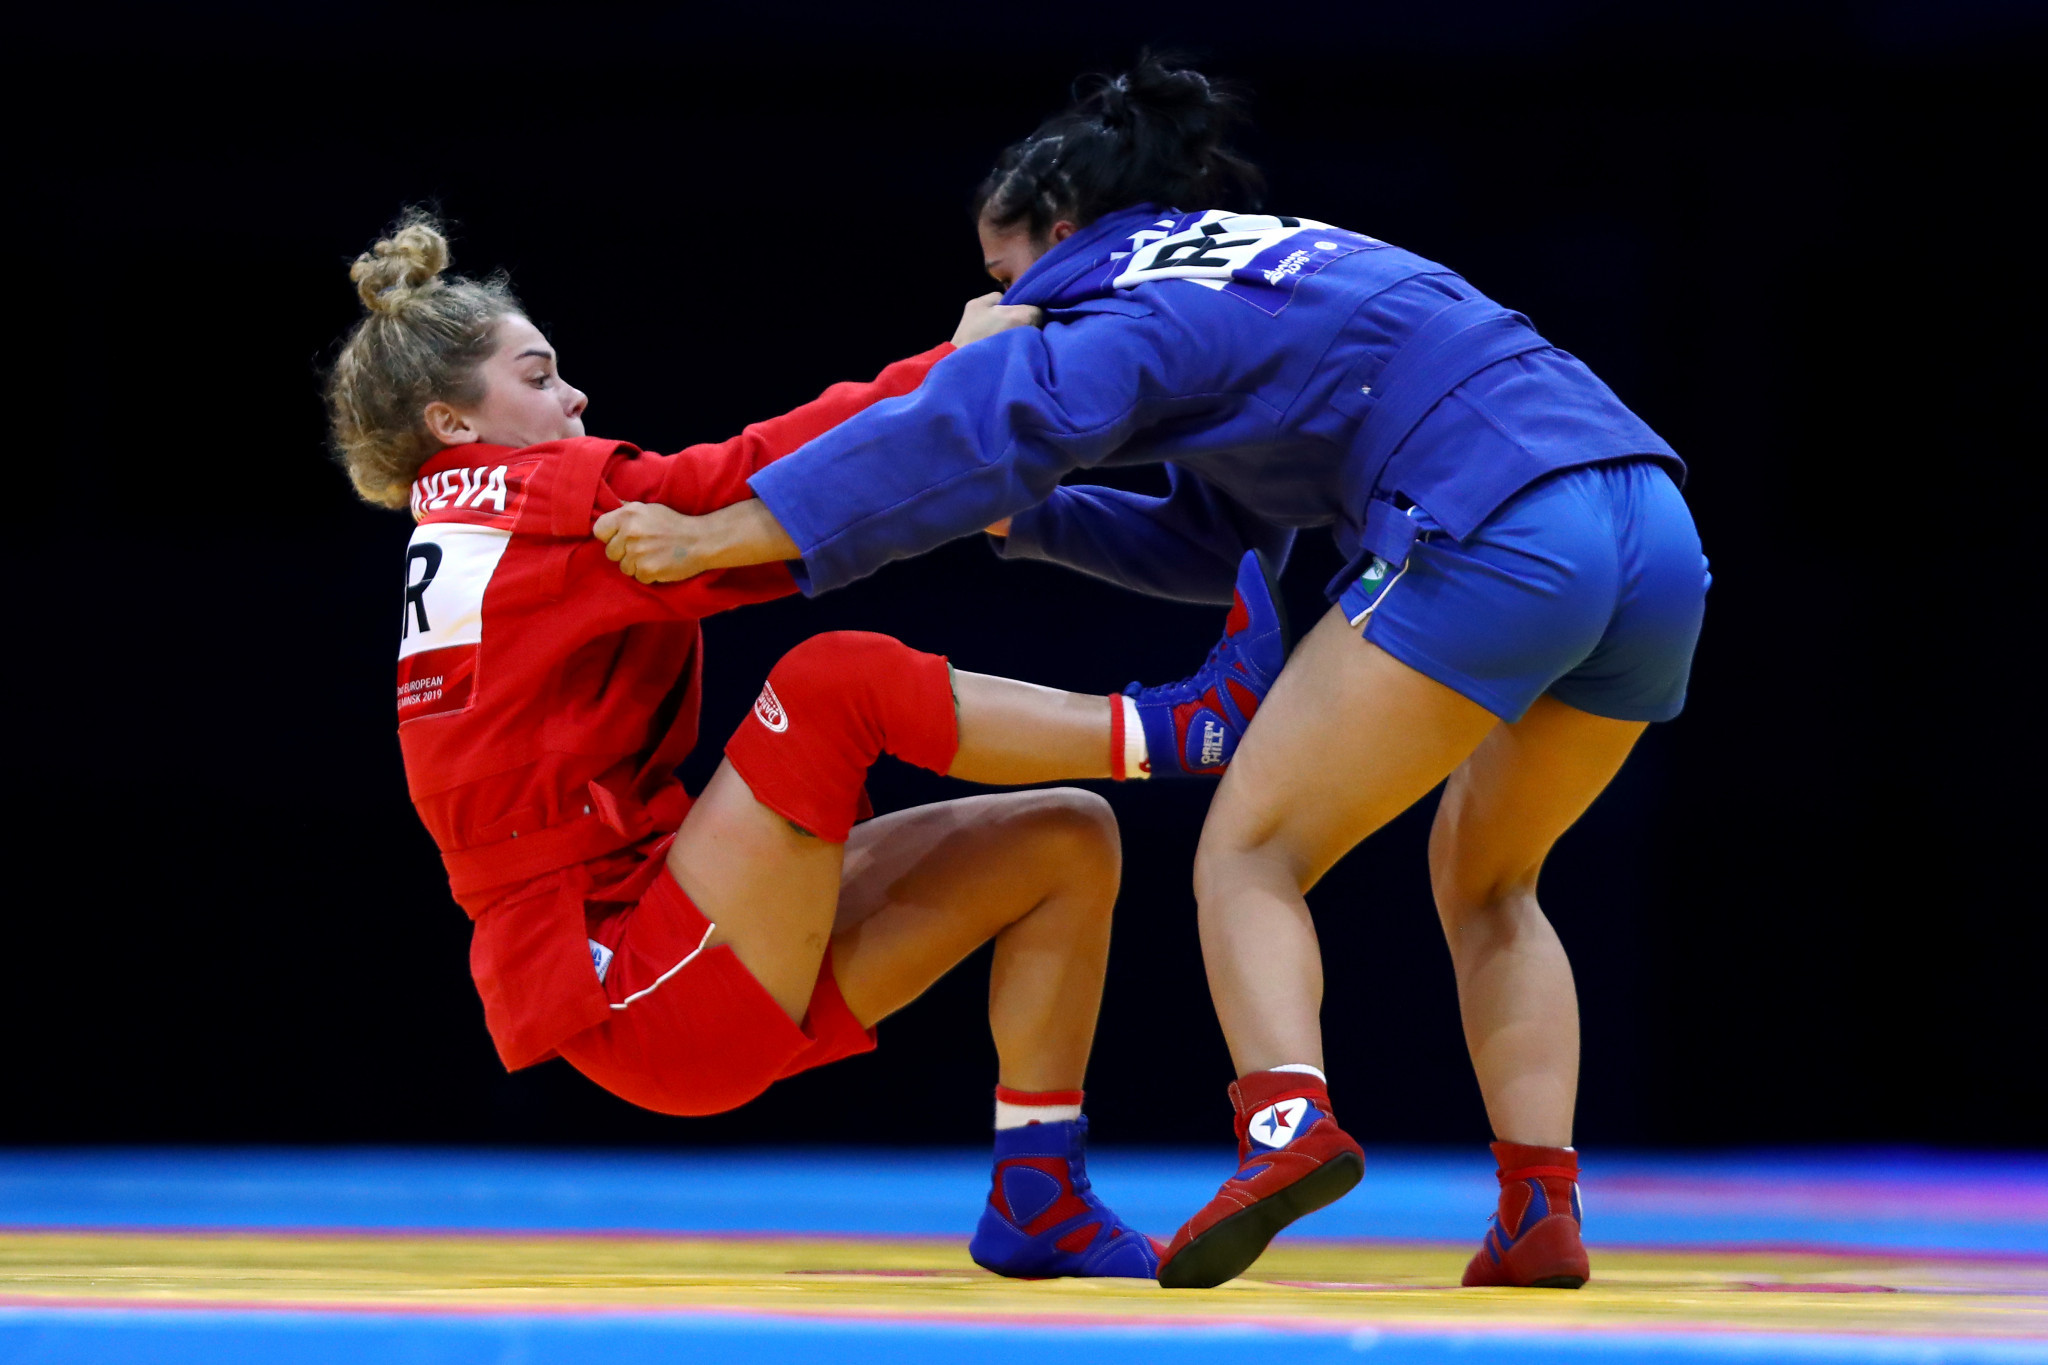 Sambo was on the programme at the Minsk 2019 European Games  ©Getty Images